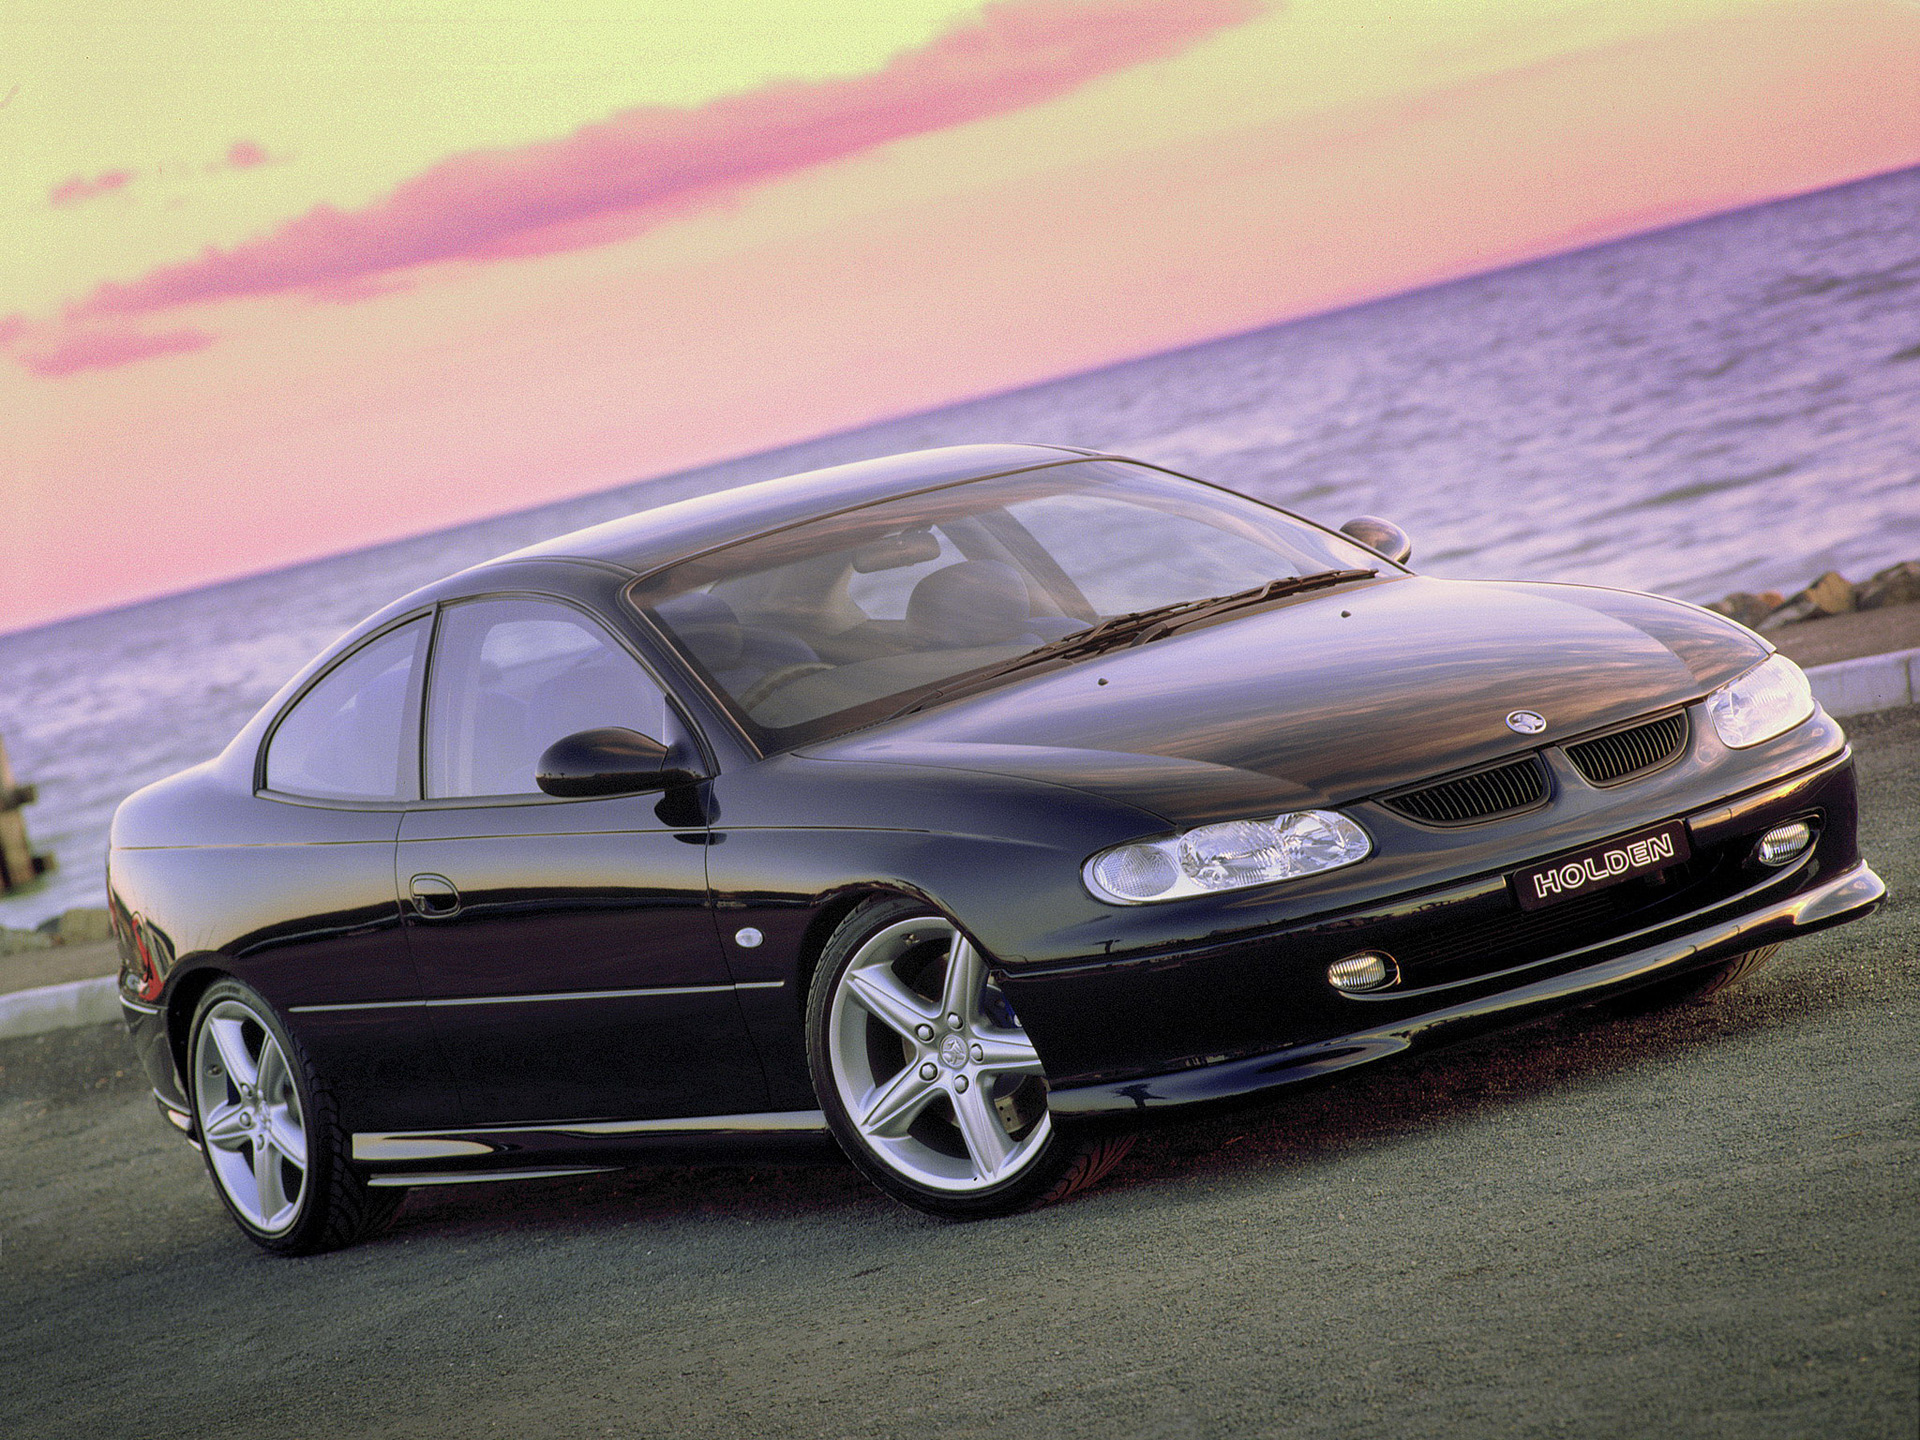  1998 Holden Coupe Concept Wallpaper.